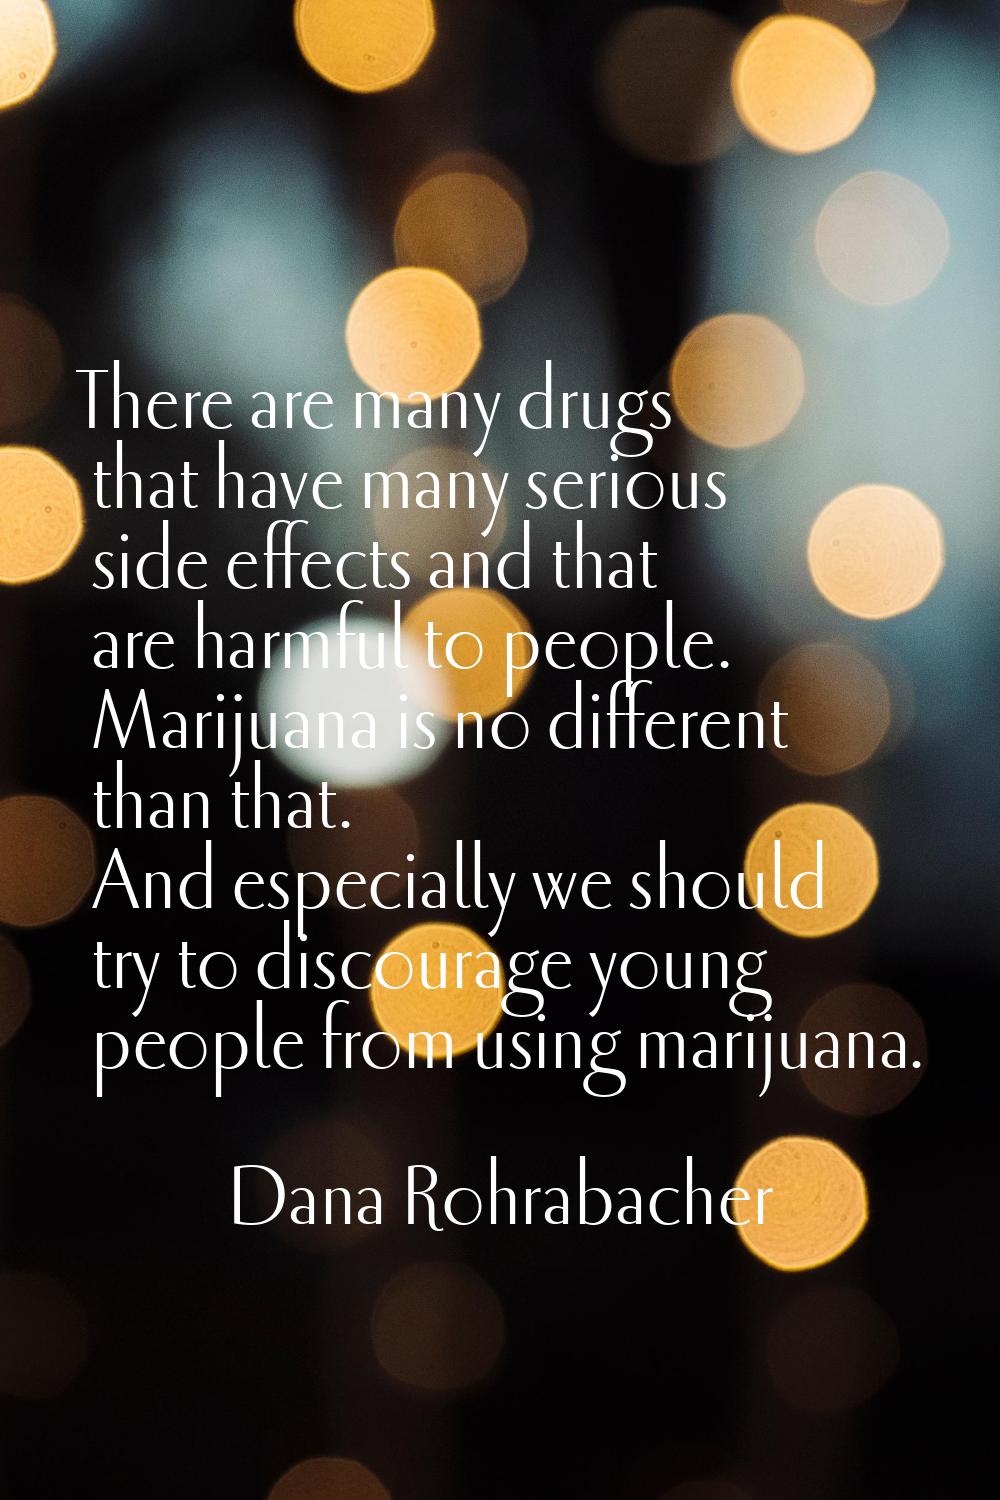 There are many drugs that have many serious side effects and that are harmful to people. Marijuana 